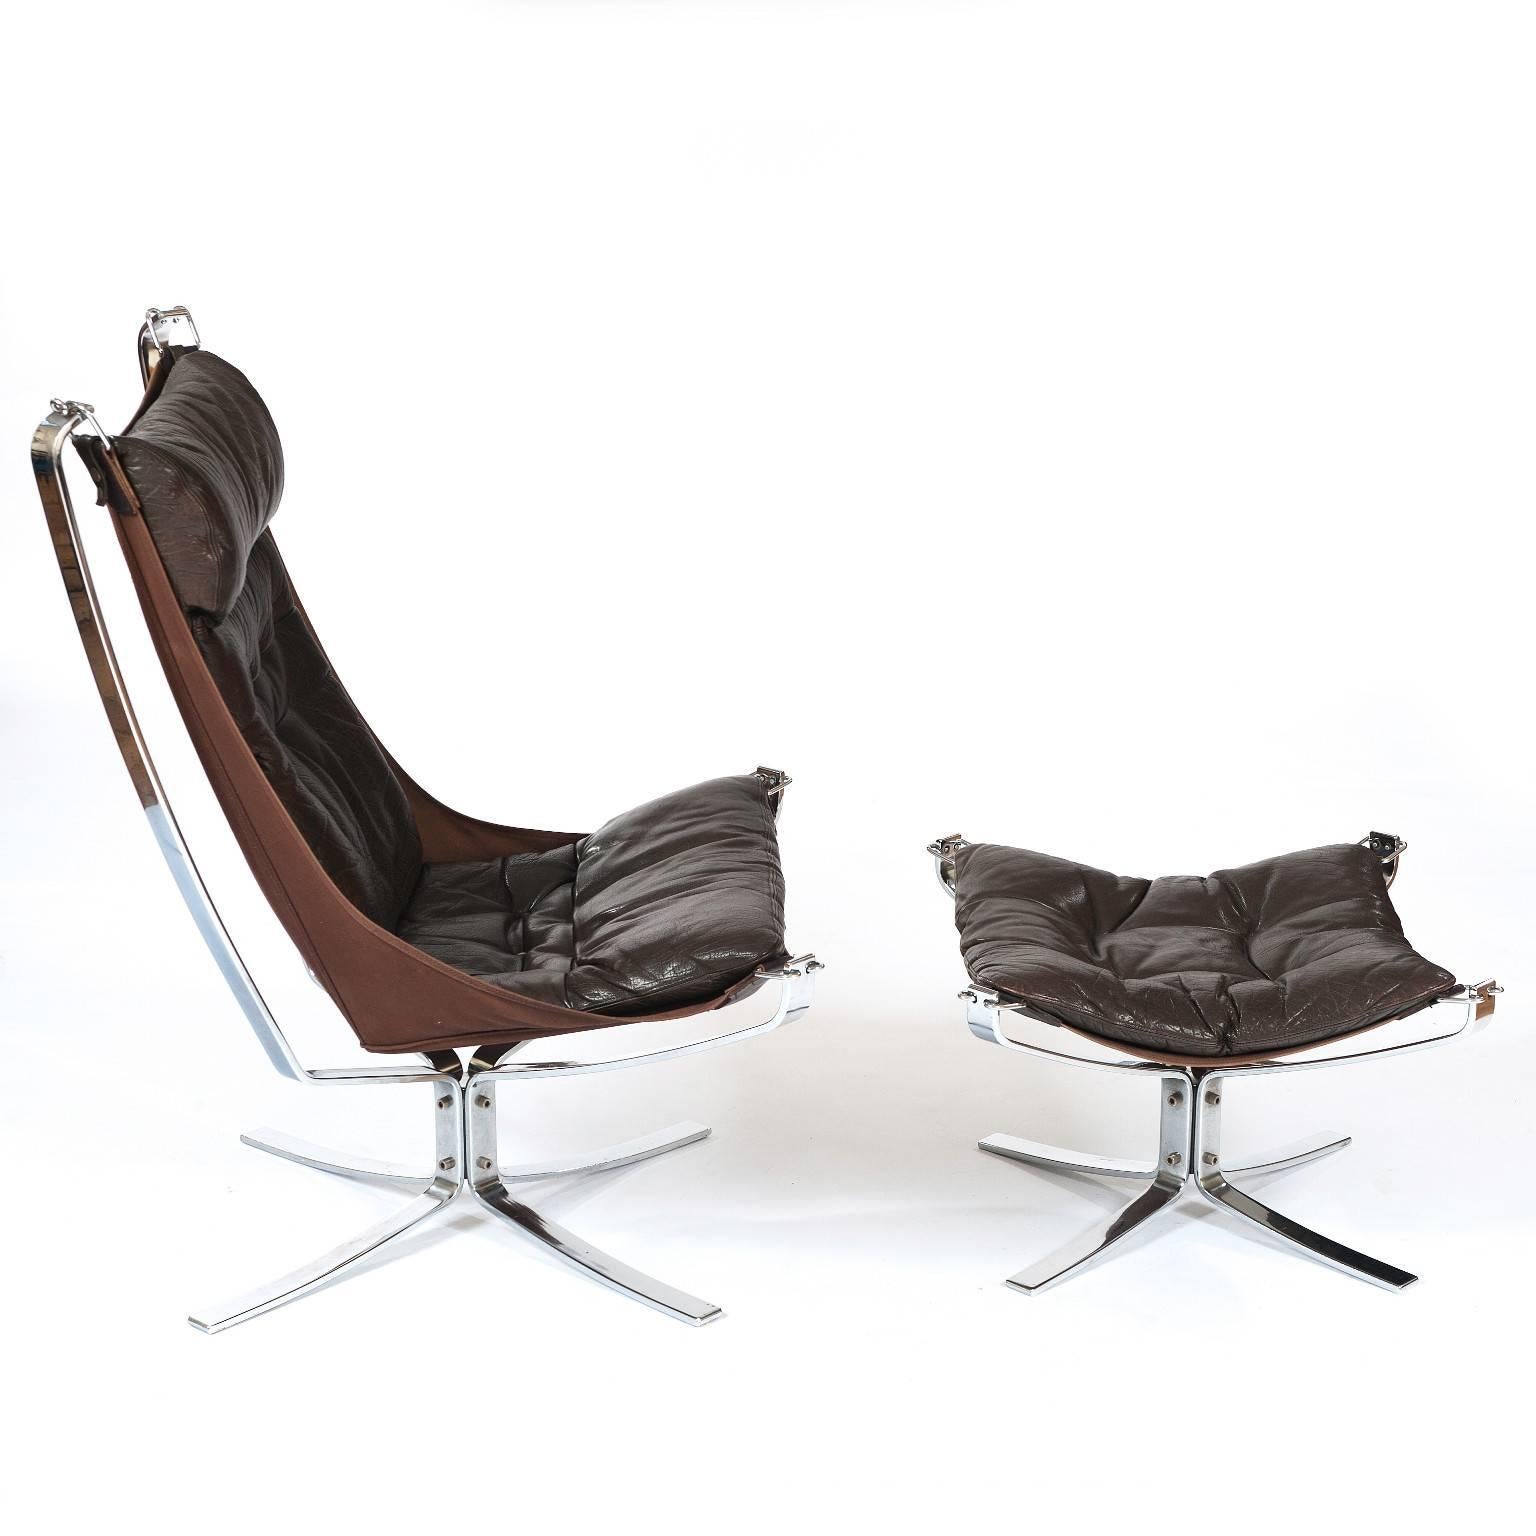 Designed by Sigurd Ressell in the late 1960s, the Falcon chair has since become an iconic piece of design history. Originally produced in 1971 with a chrome frame, the chair was altered in 1974 and used lightweight glued lamell legs to make